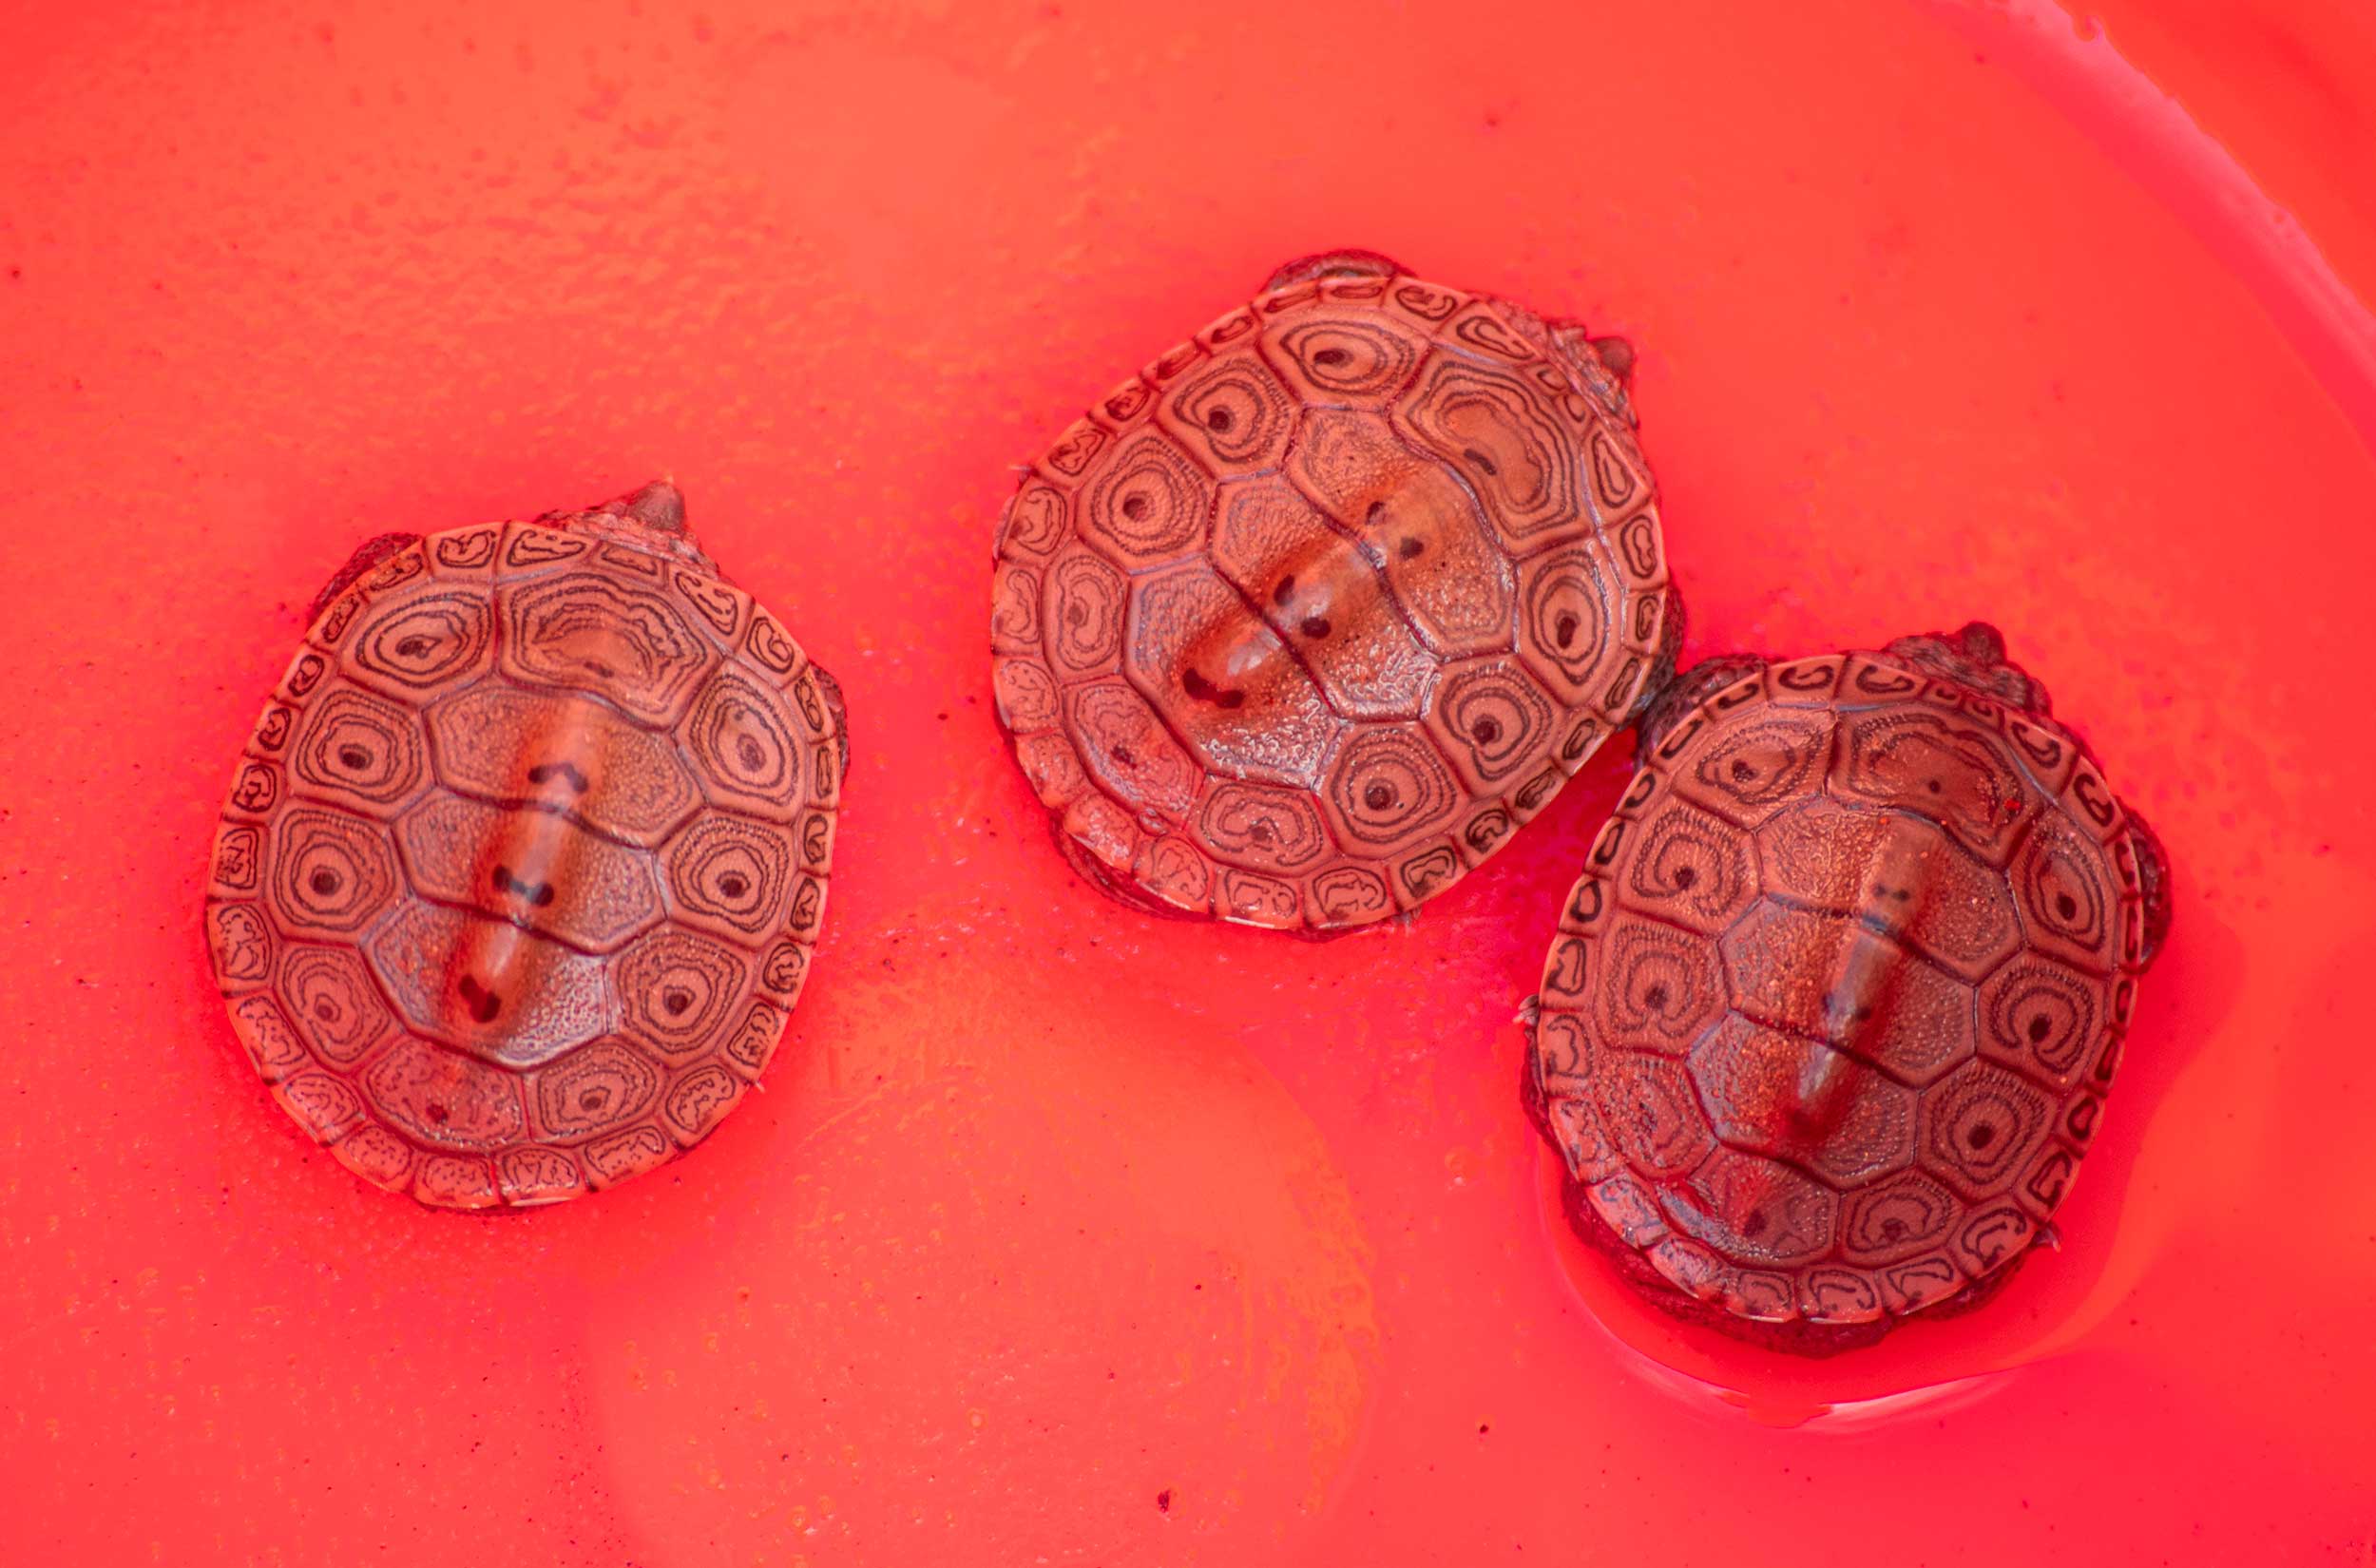 Baby diamondback turtles in the bottom of a pail